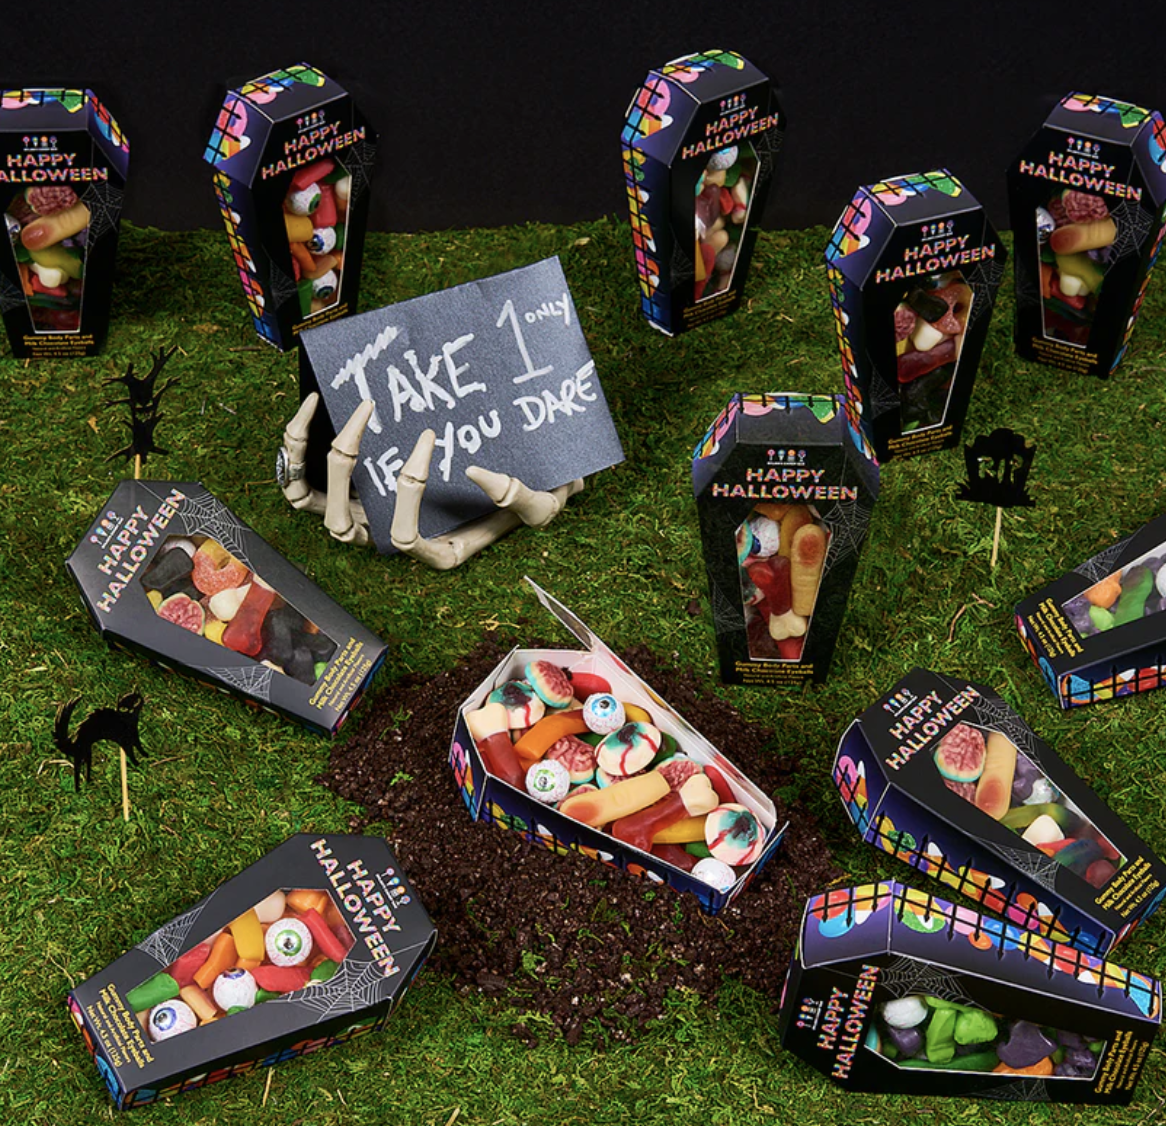 creepy candy coffins all over grass with gummy candies inside